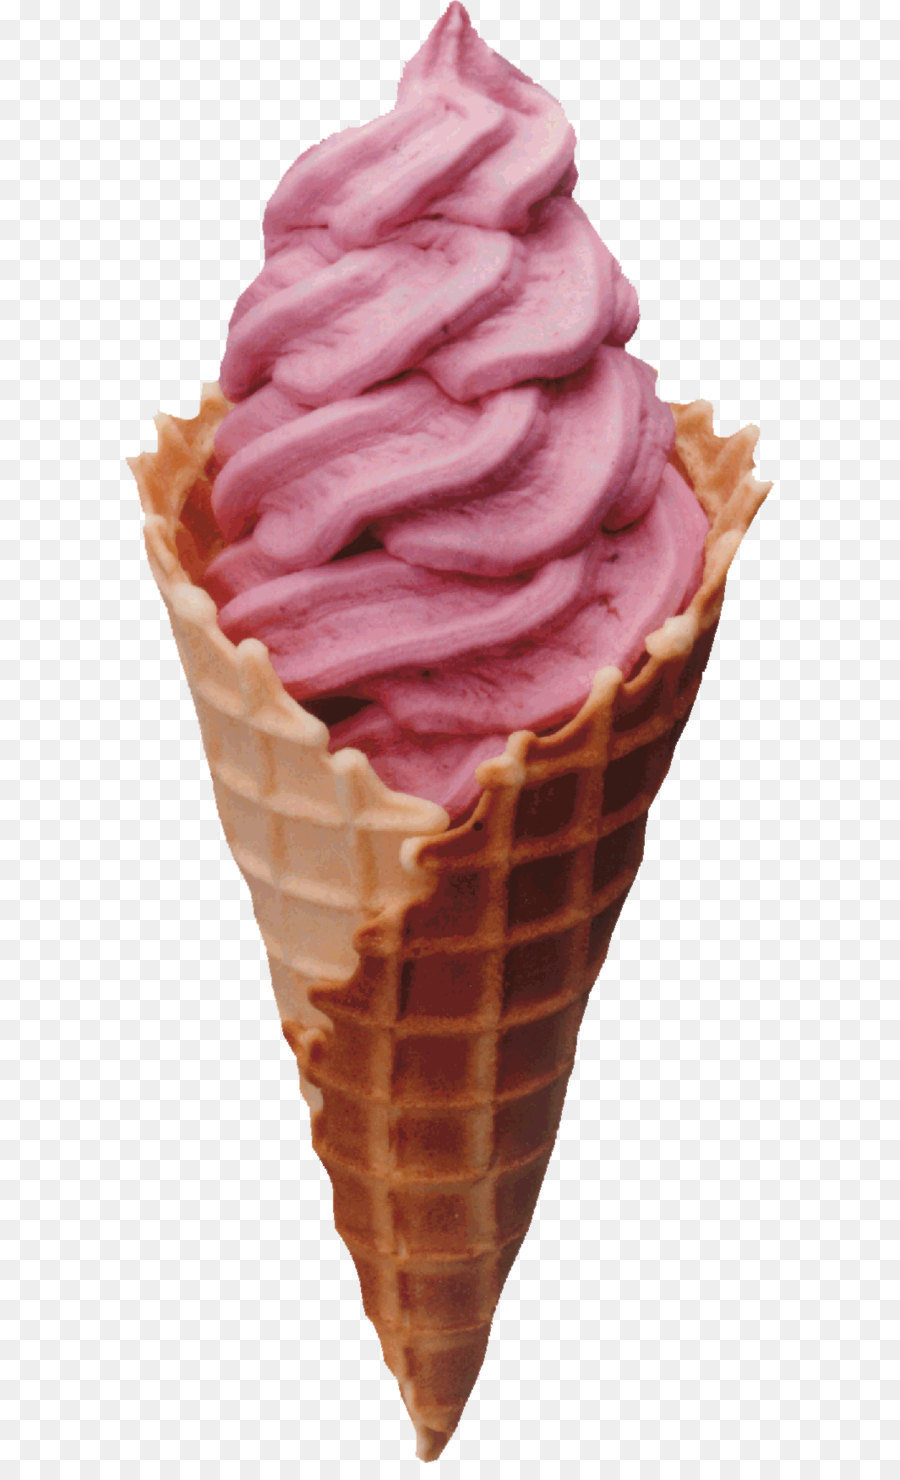 Ice cream cone Milkshake Waffle - Ice cream PNG image png download - 769*1731 - Free Transparent Ice Cream png Download.